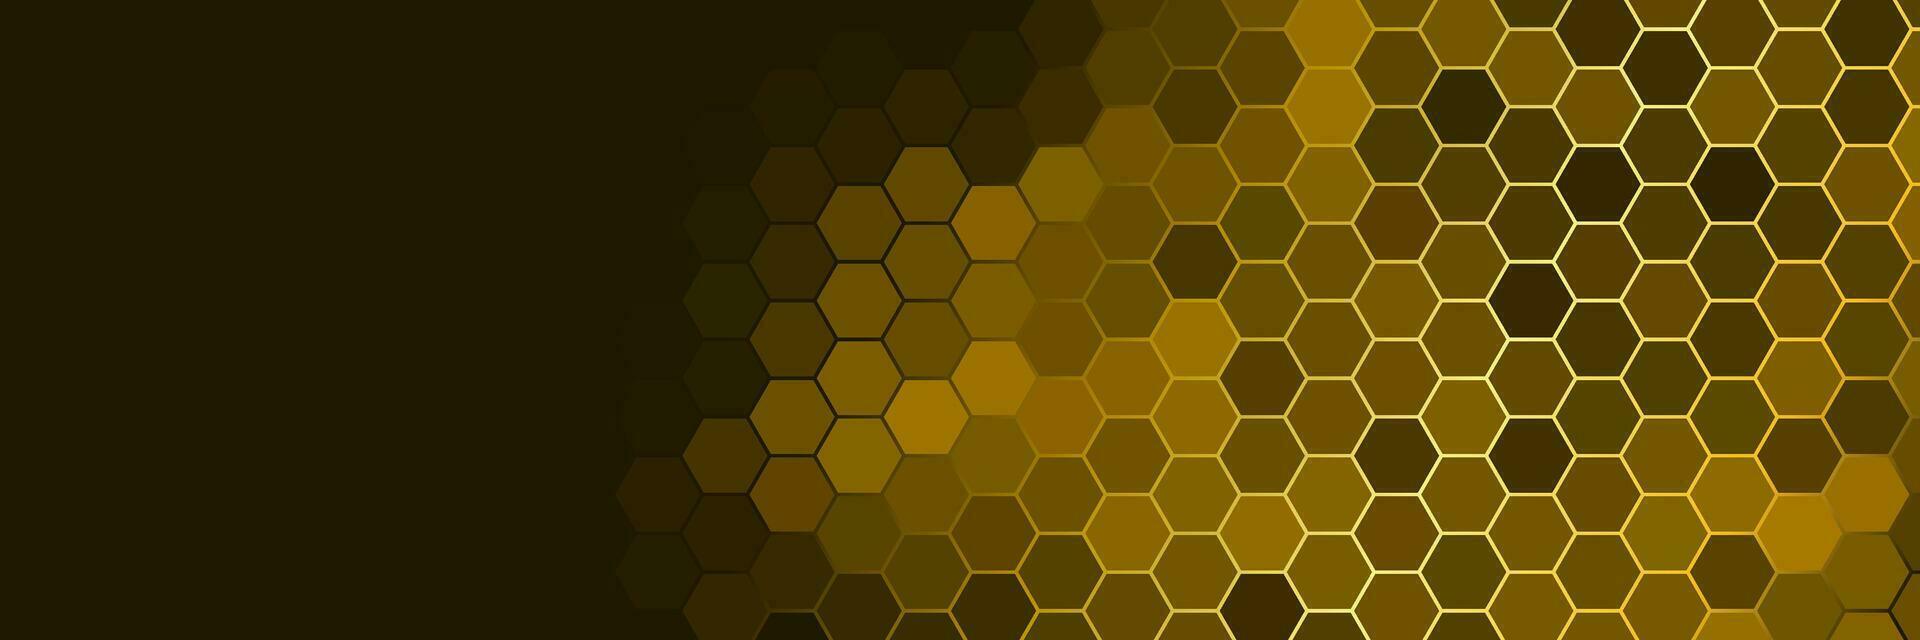 yellow hexagon background with glowing lines vector